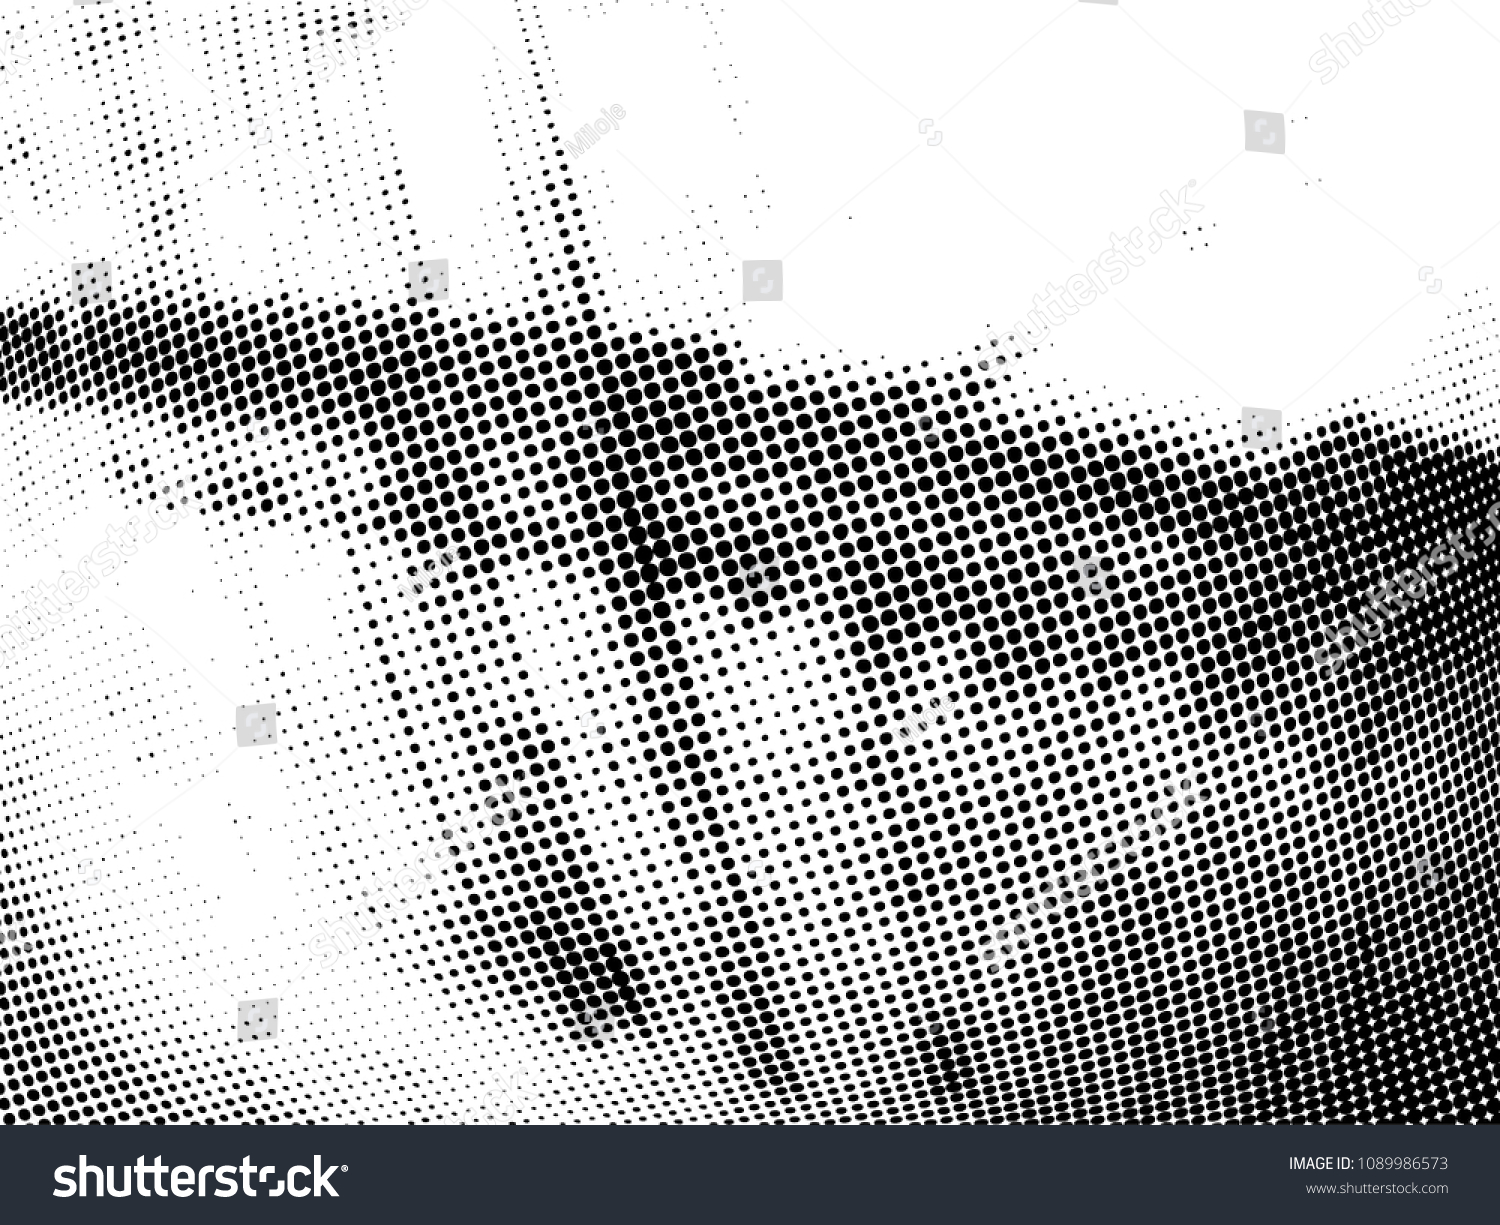 Speckled Grunge rough Background. abstract,splattered , dirty Texture Vector for your design. Dust Overlay Distress Grain ,Simply Place illustration over any Object to Create grungy Effect #1089986573